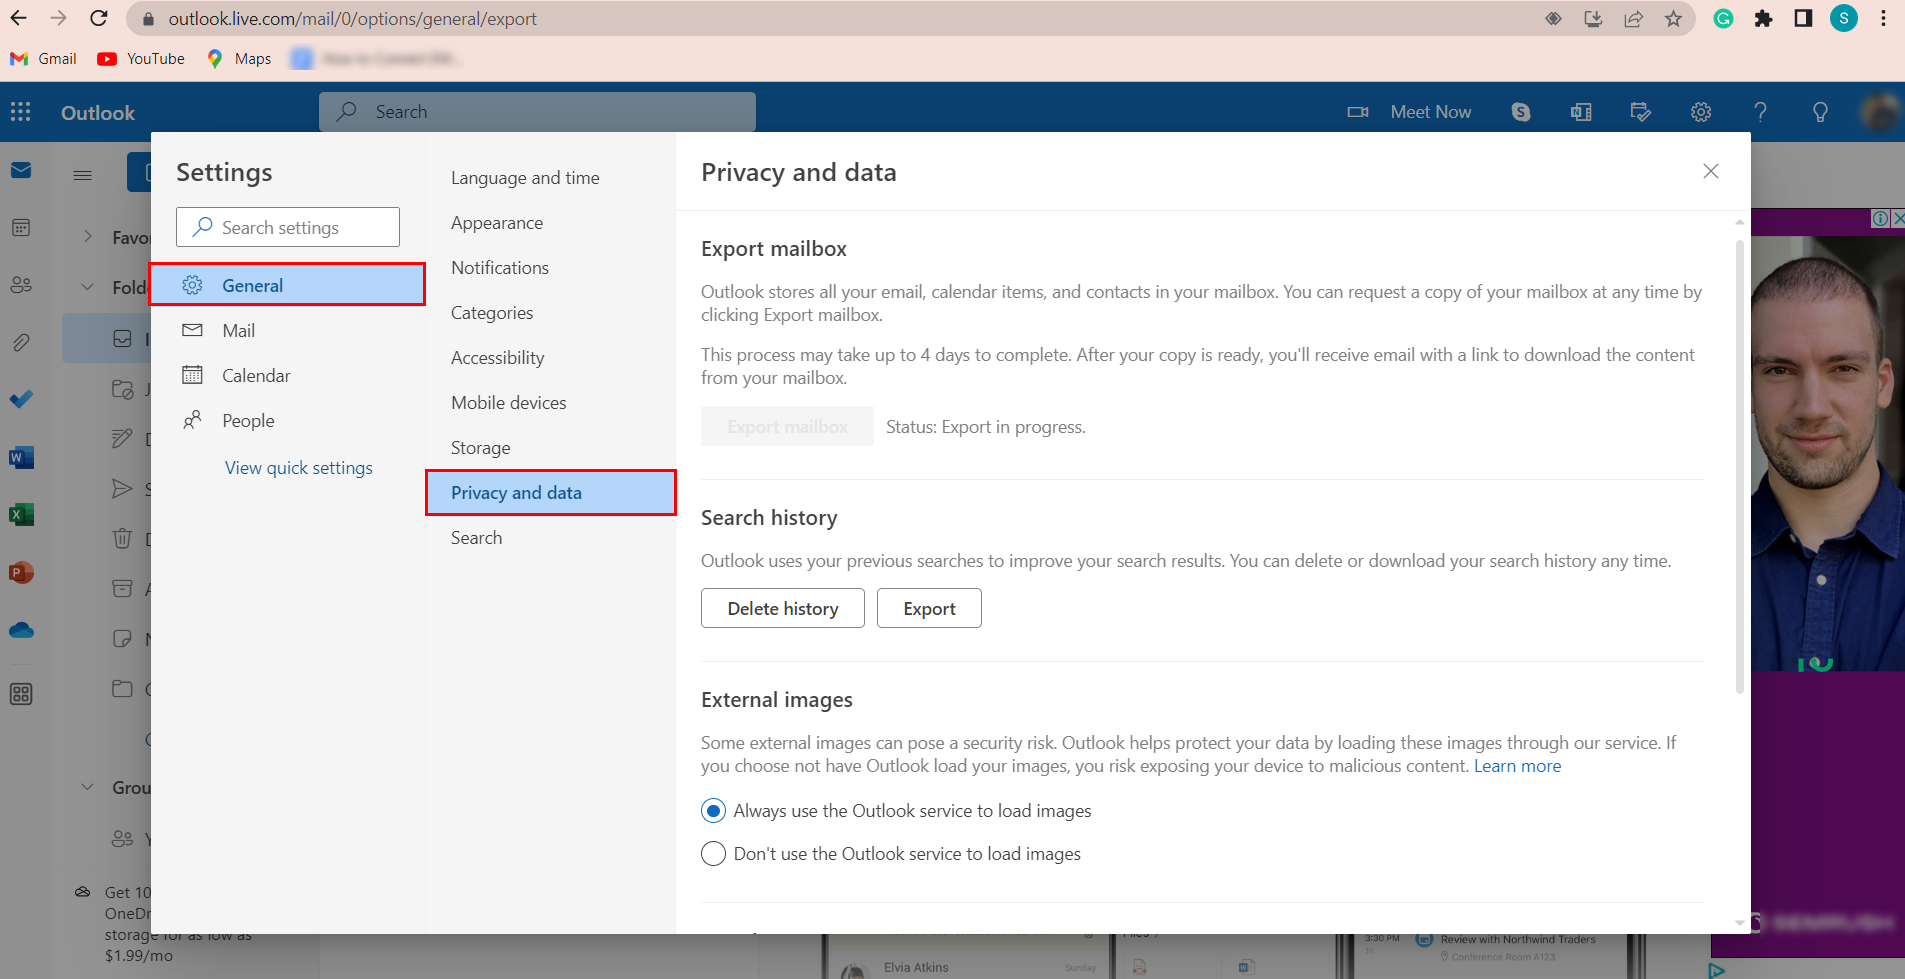 Microsoft Outlook - Privacy and data option